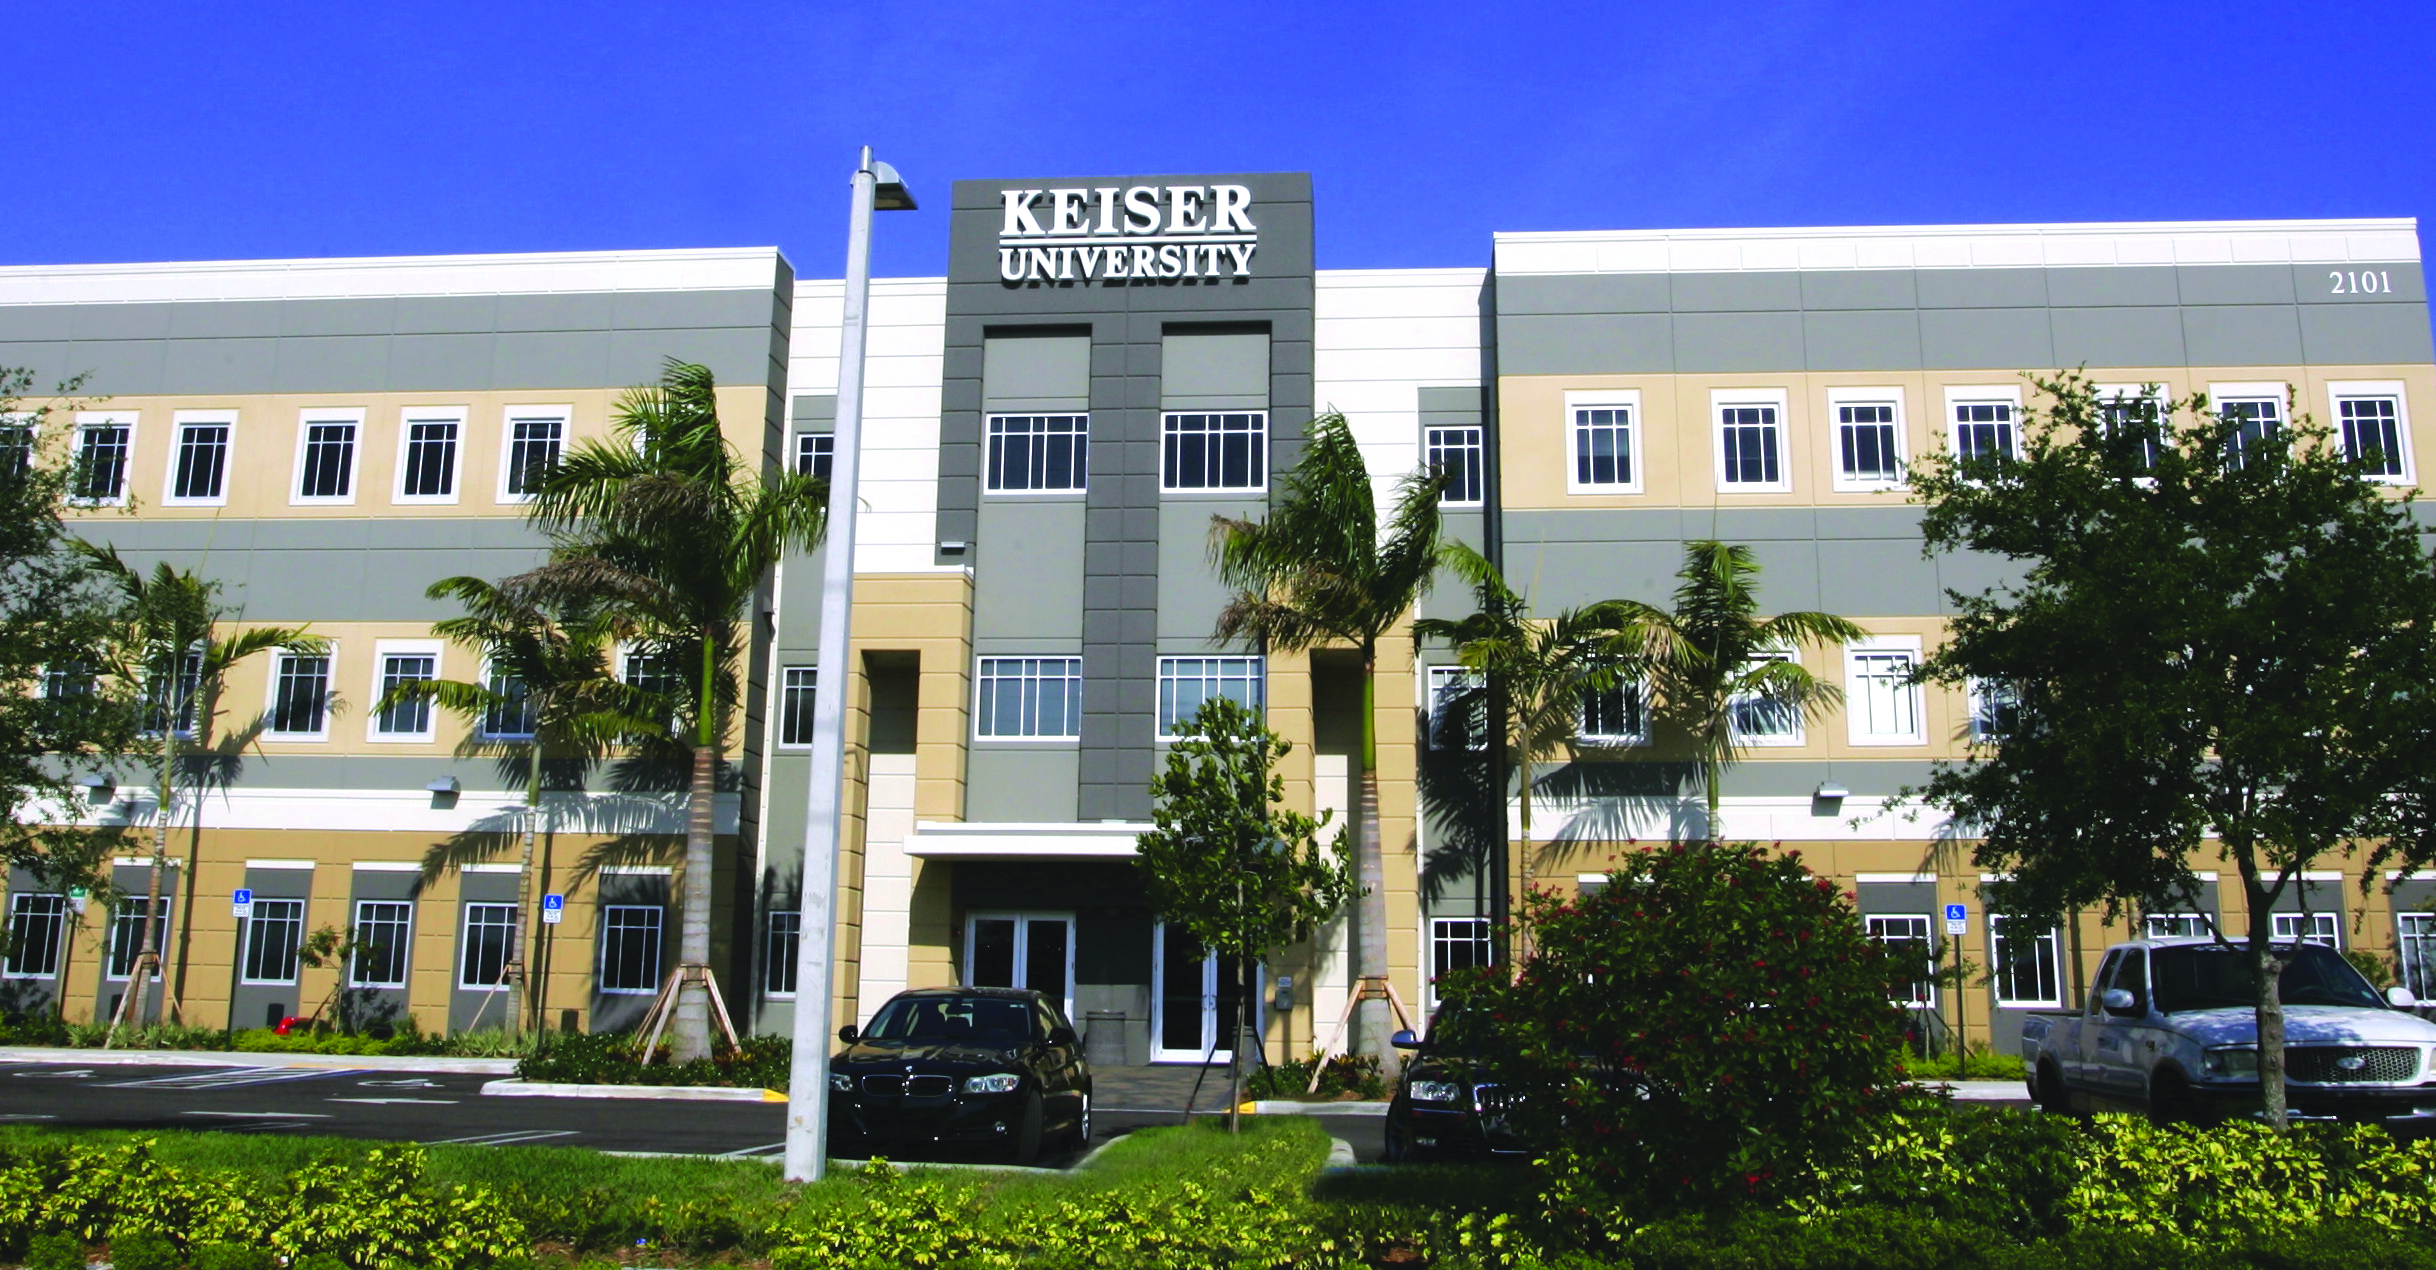 Keiser University’s Miami Campus Serves as an IRS Tax Preparation Site with Highest Number of Returns Accepted in Region